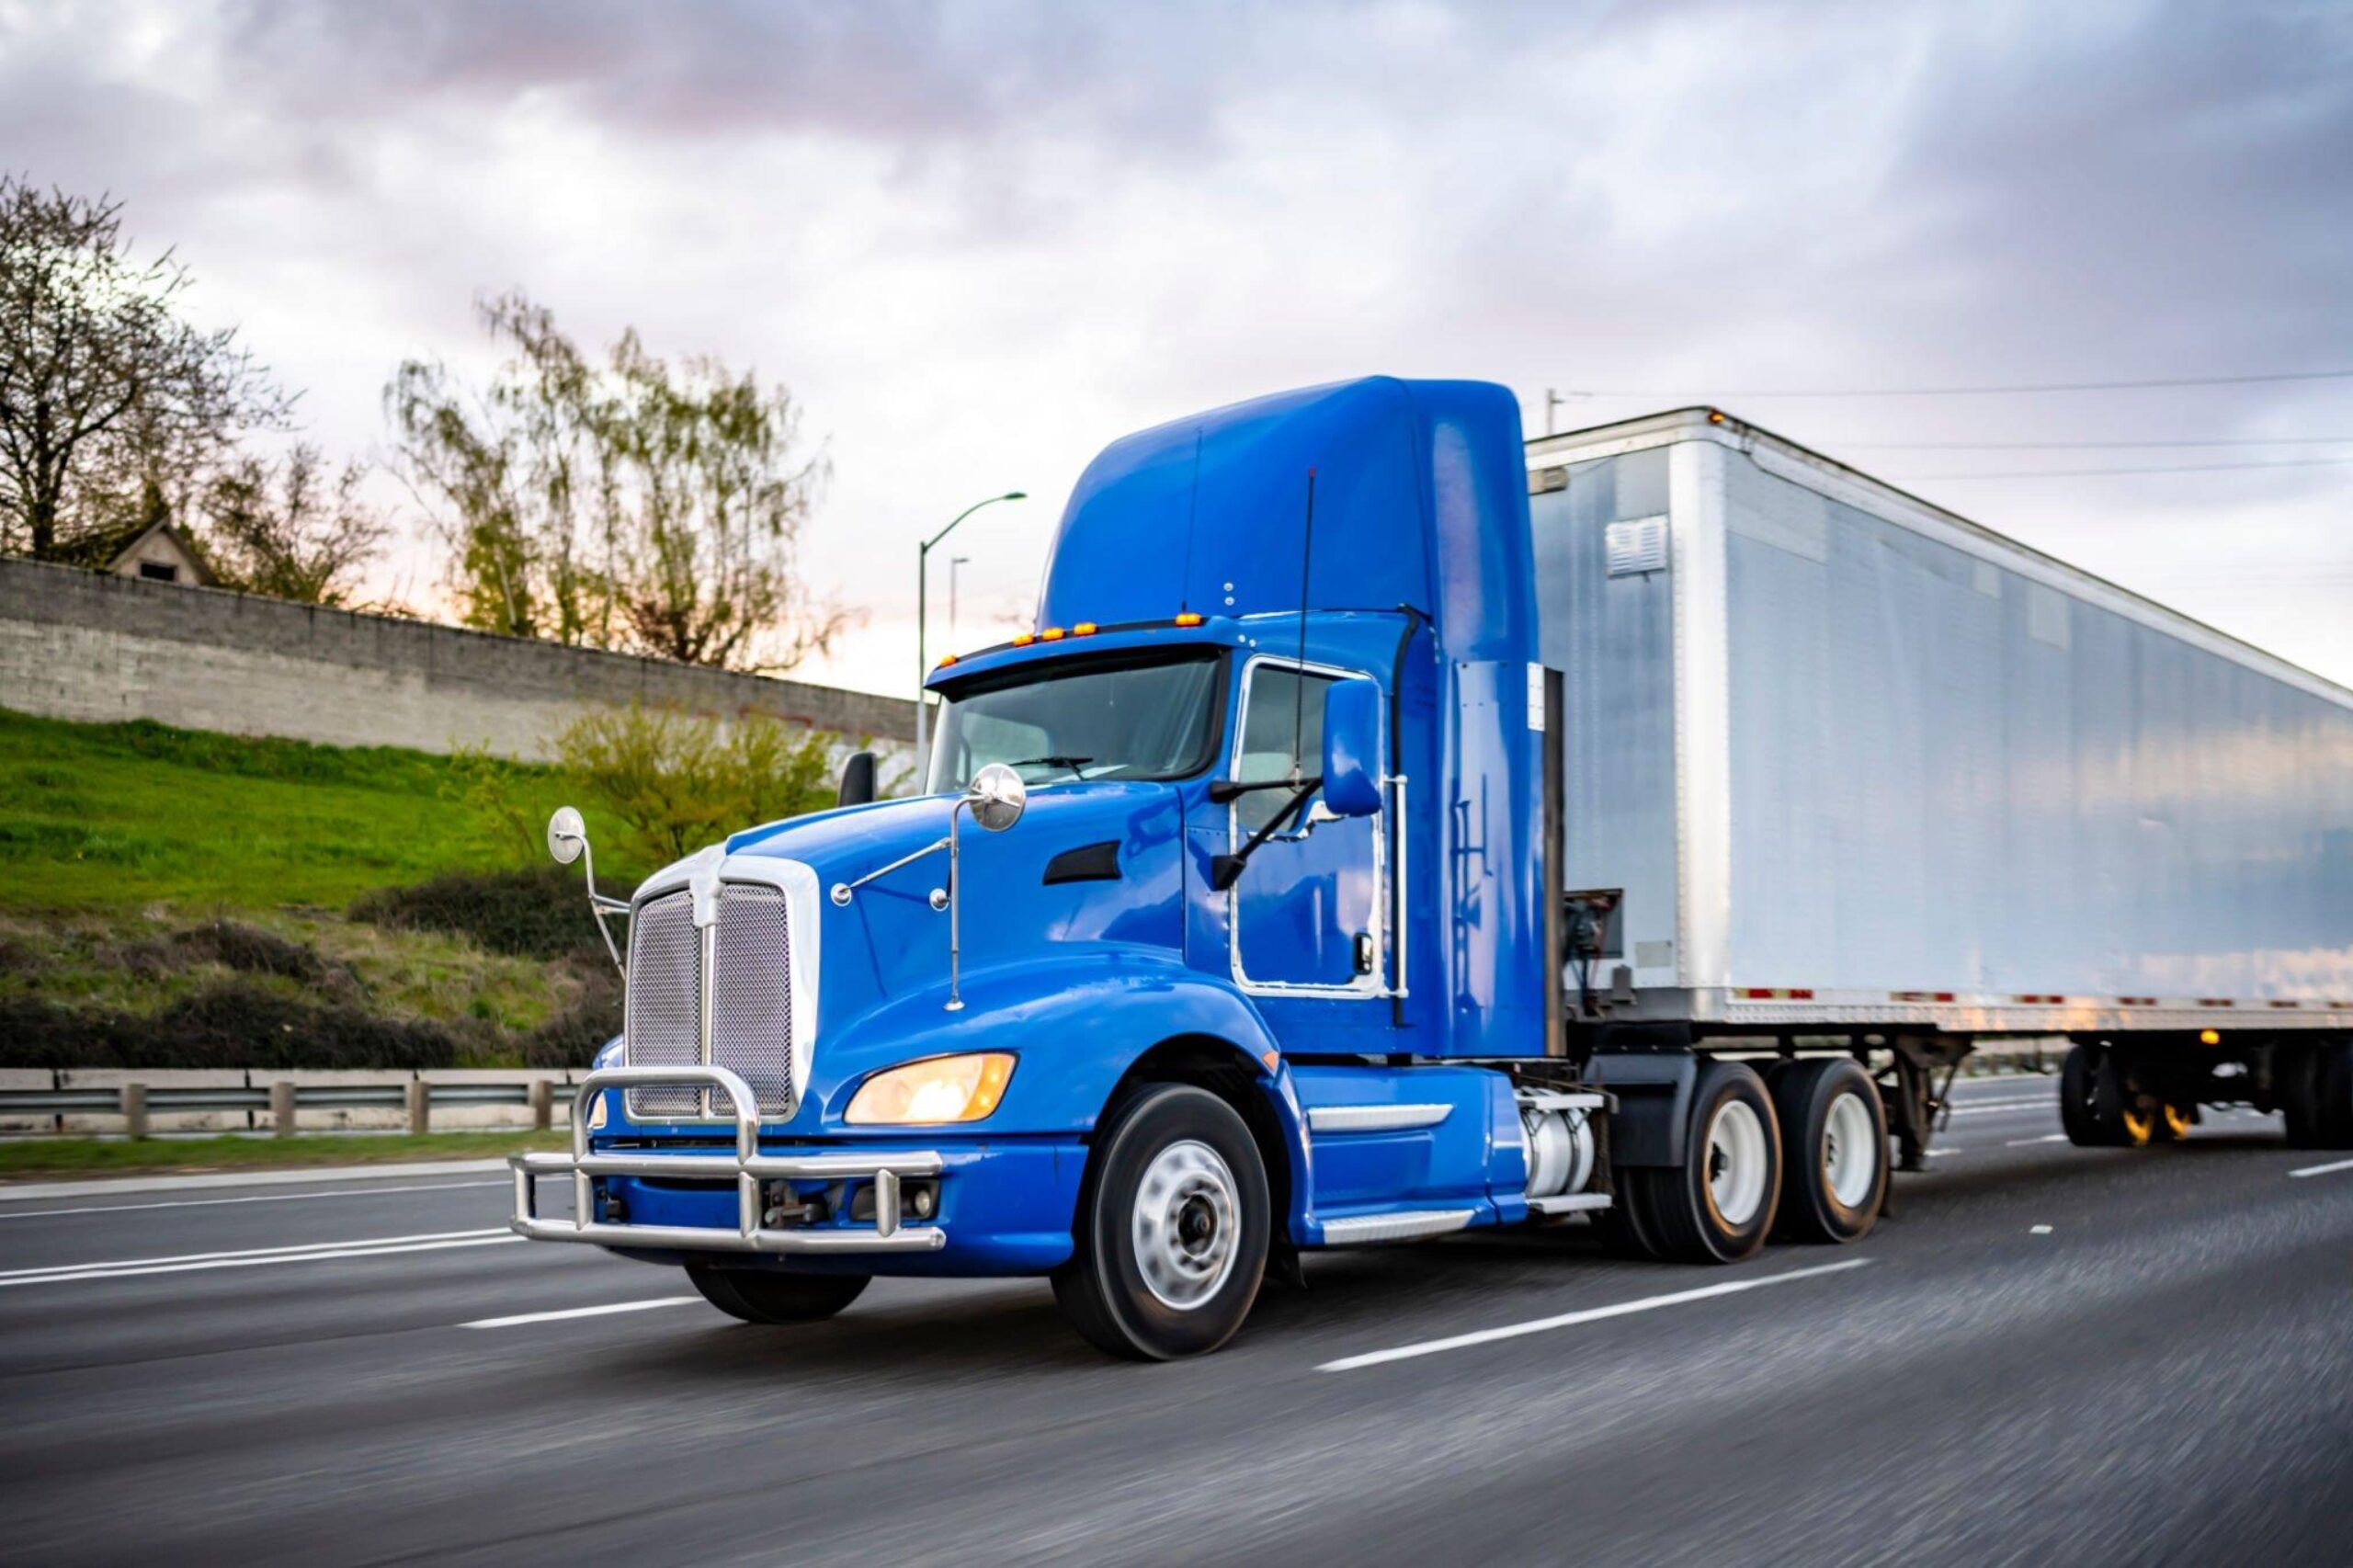 Chart of Accounts for a Transportation, Trucking, or Delivery Company